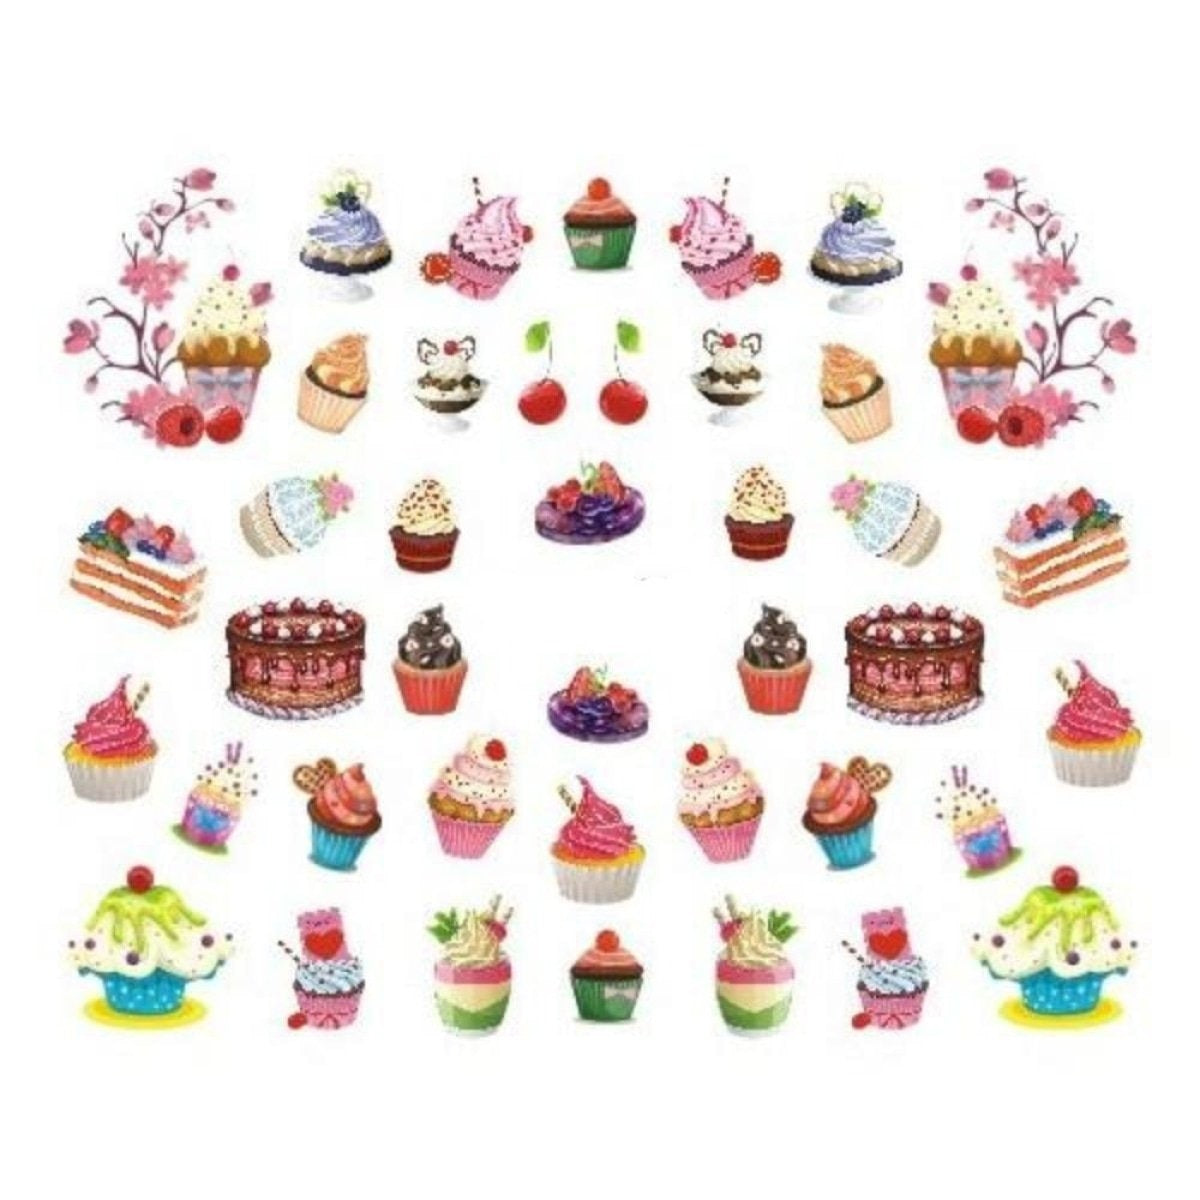 Strawberry Summer Cake & Fruit Stickers For Nails Nail Manicure Art Stz-477 - Sheet